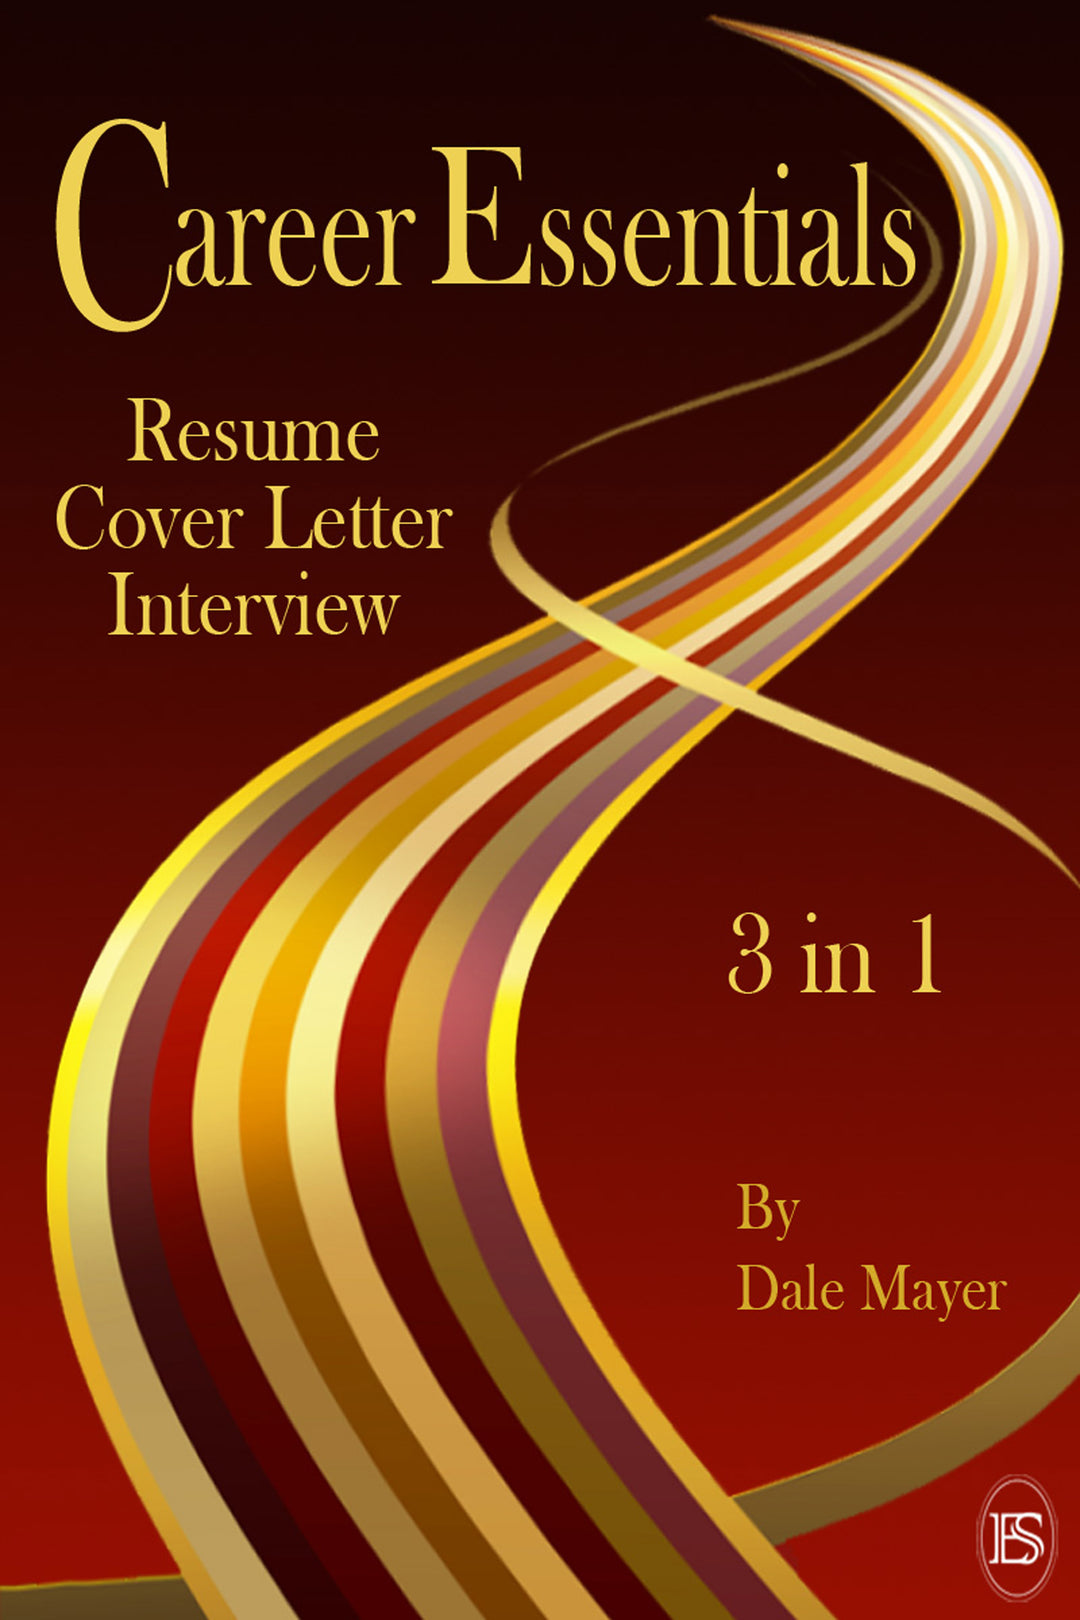 Career Essentials Book Collection by Dale Mayer